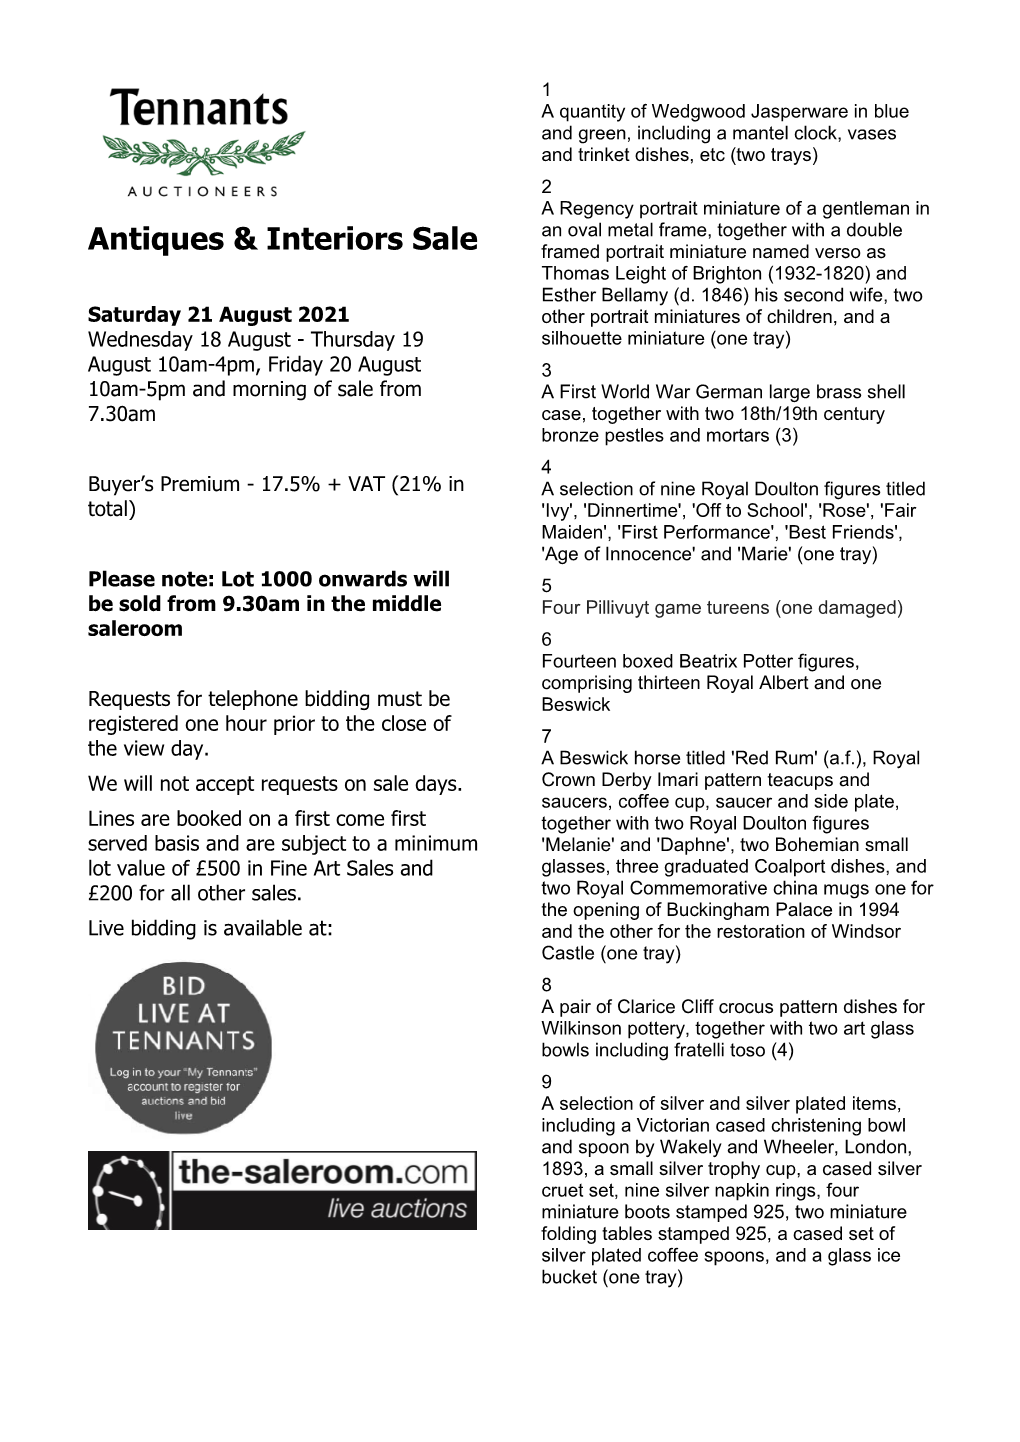 Please Click Here for PDF Version of the Catalogue